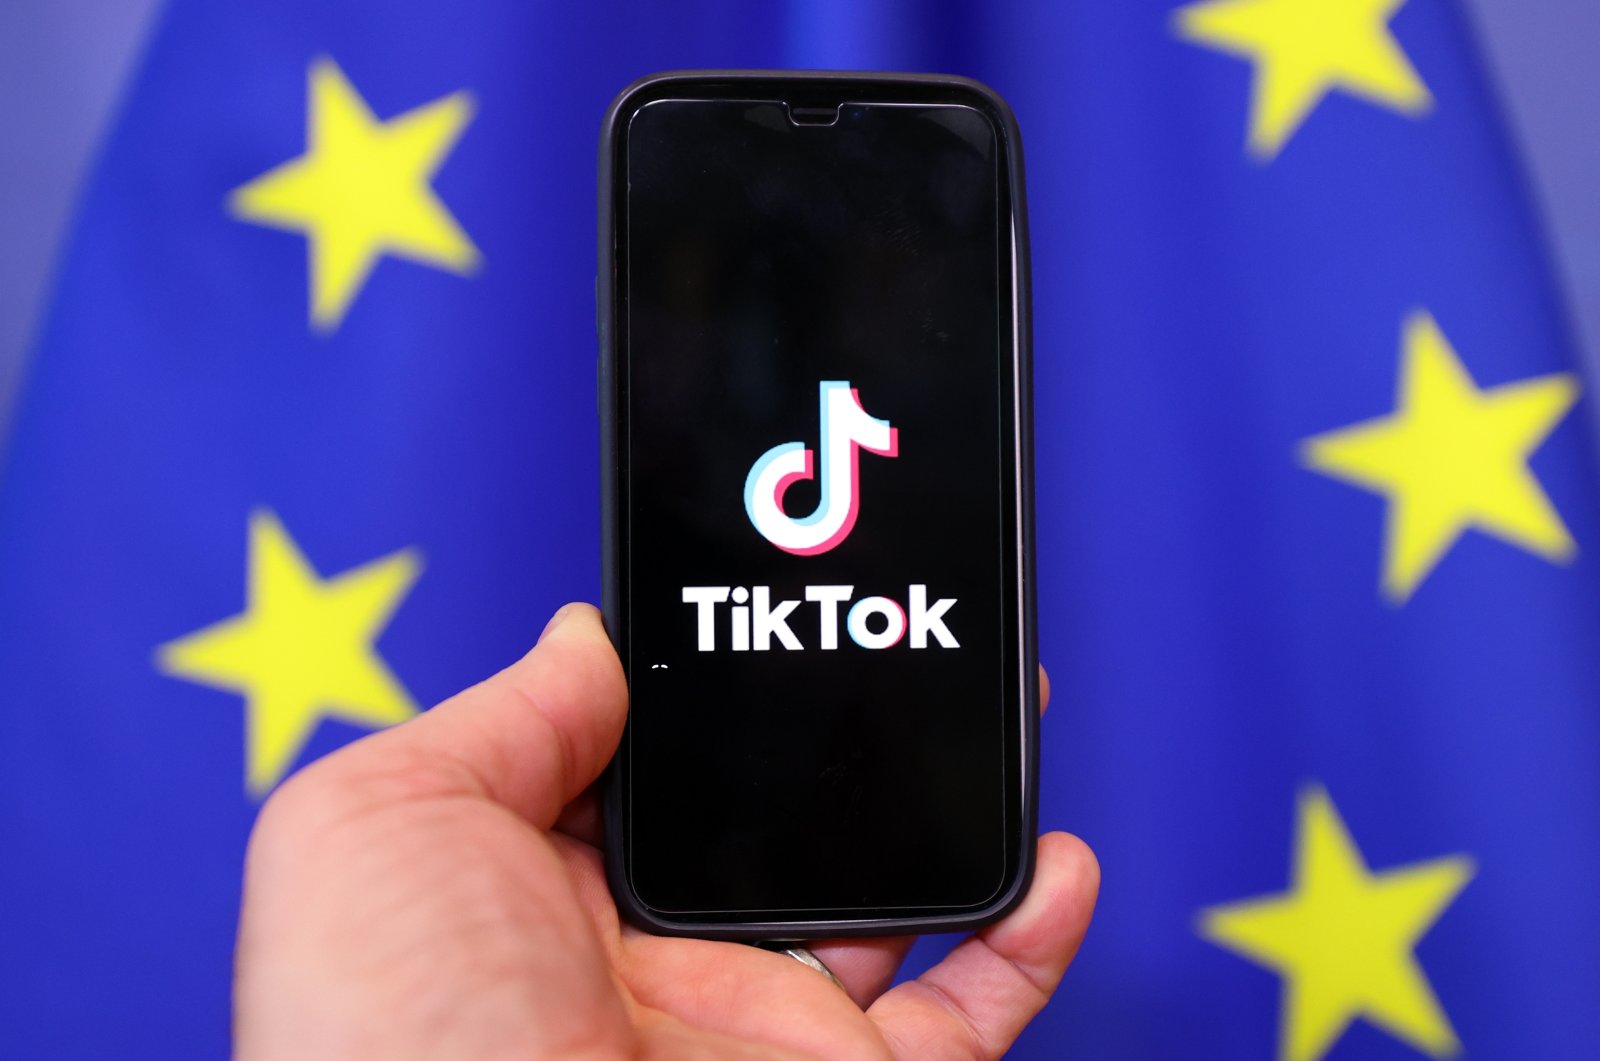 A logo of TikTok app is seen on a screen of a mobile phone with a European Union flag in the background. (AA Photo)